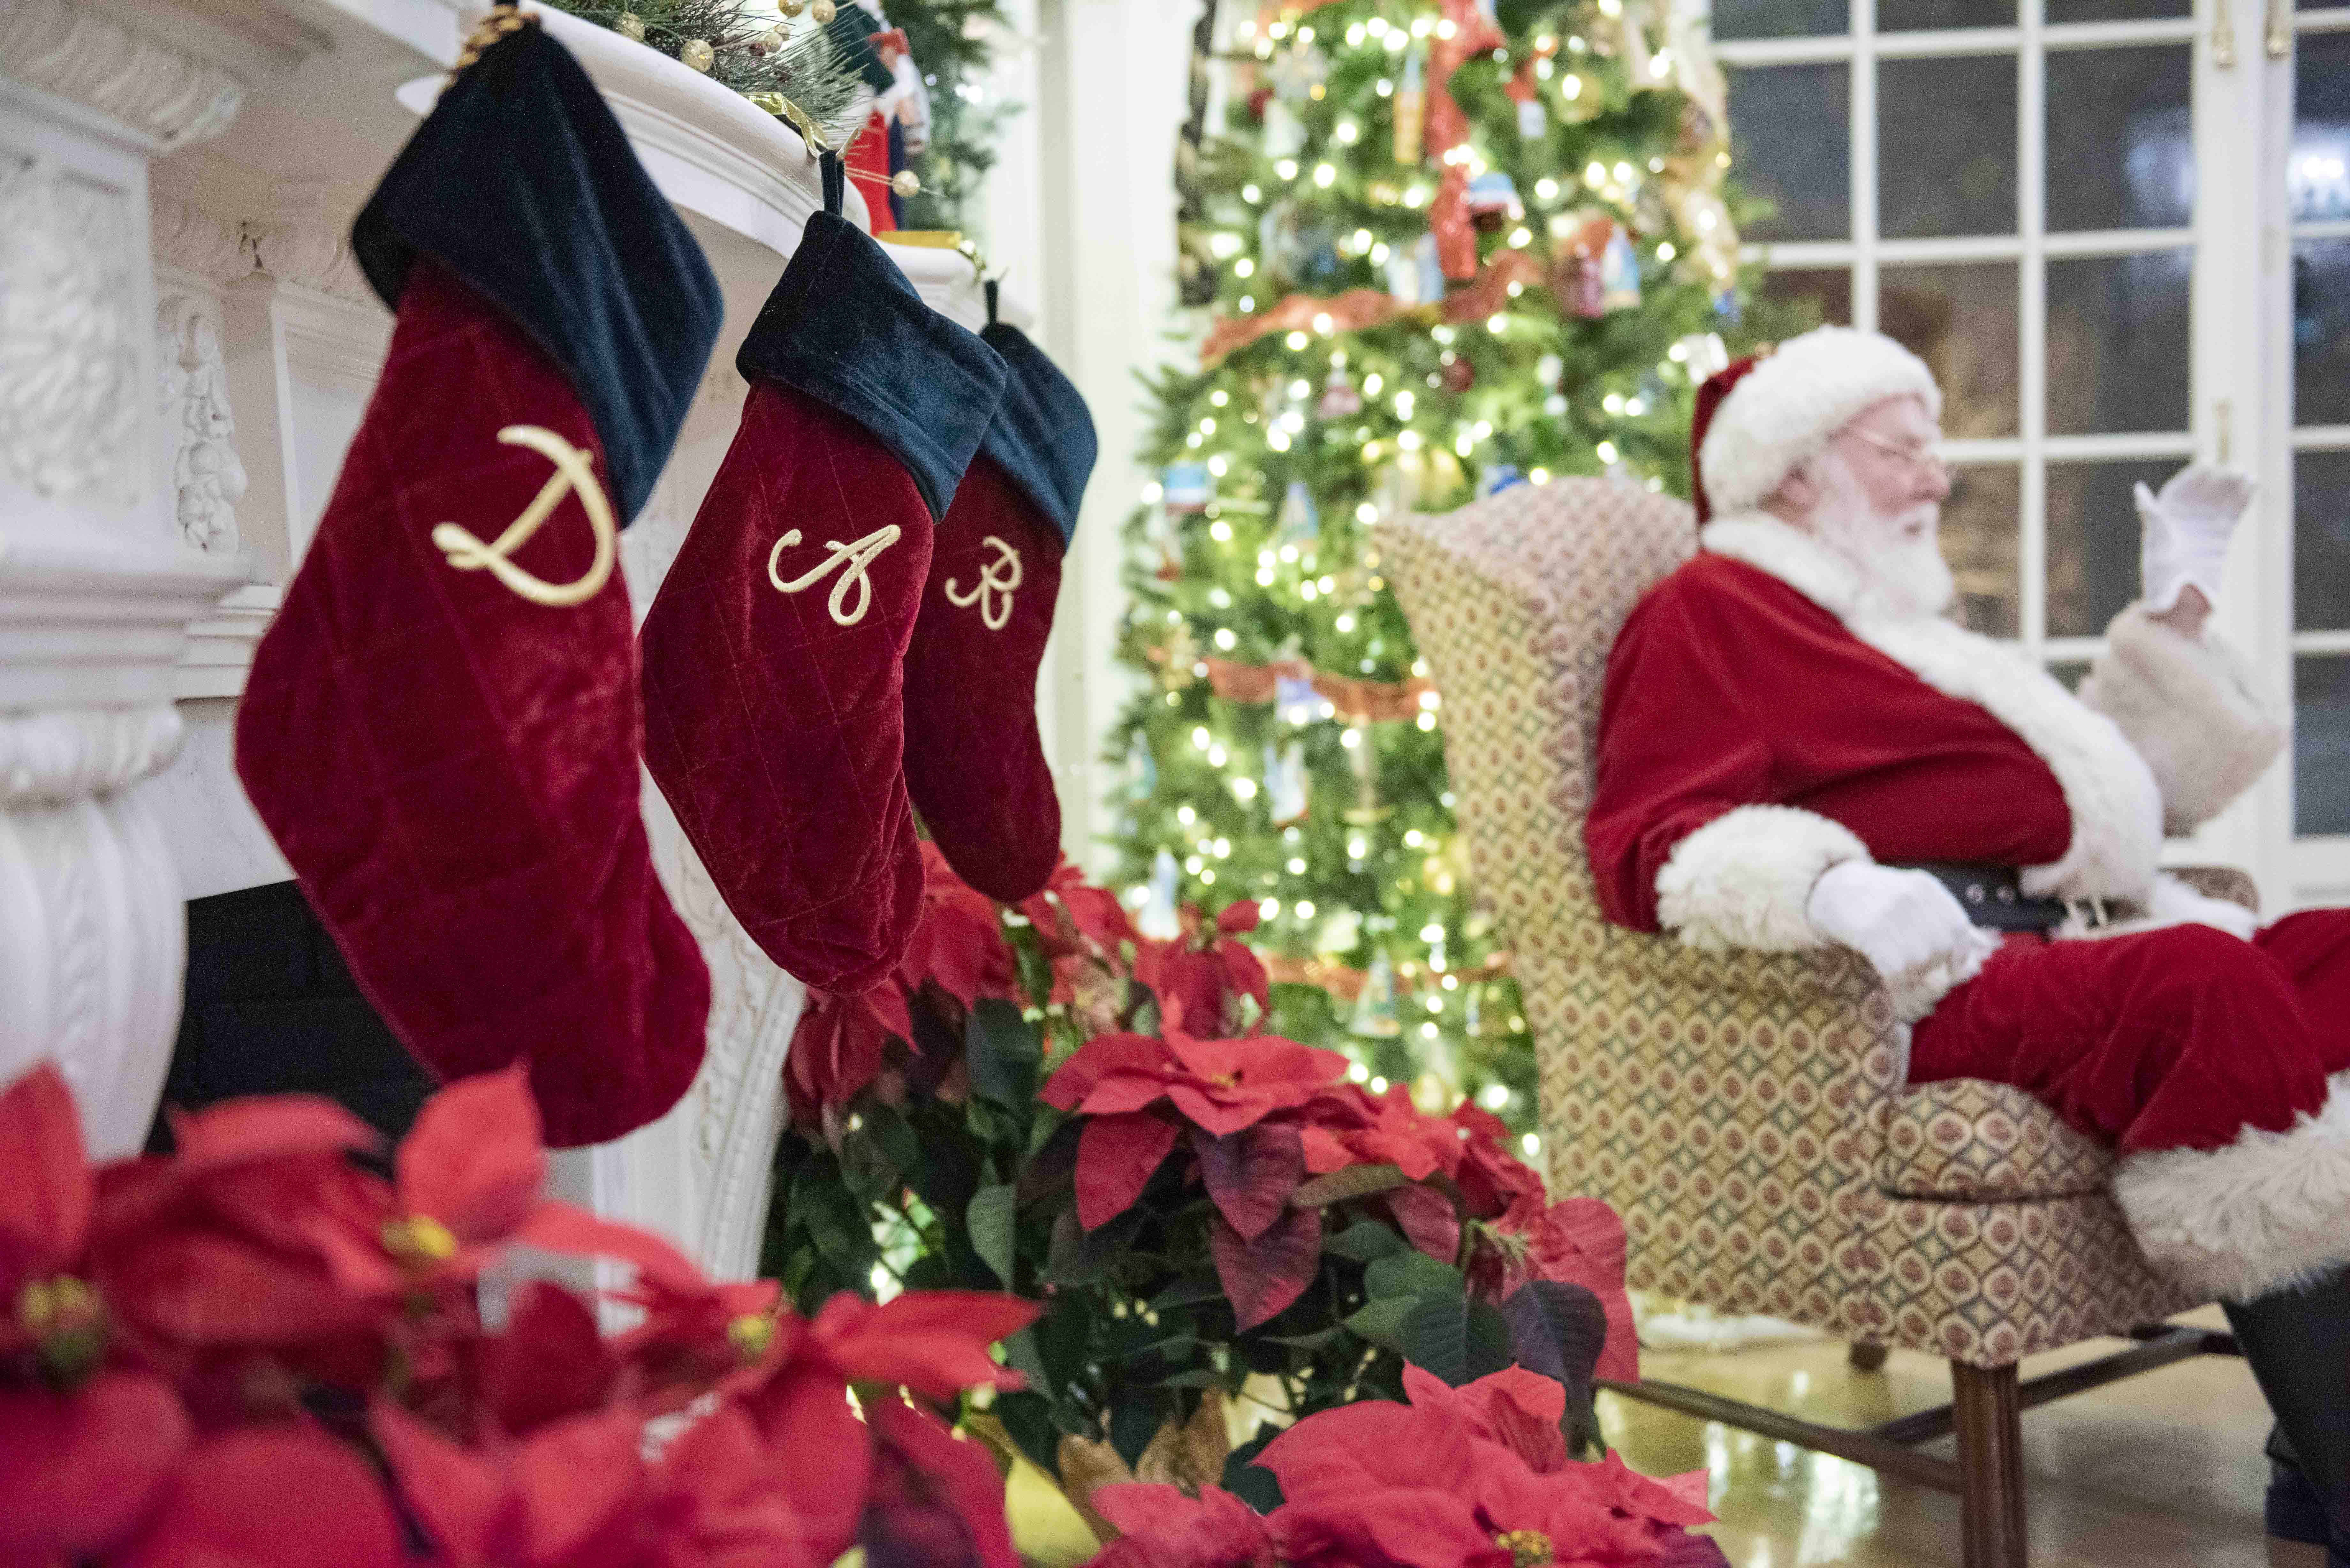 Santa sitting in chair by a tree and stockings that say D A R 